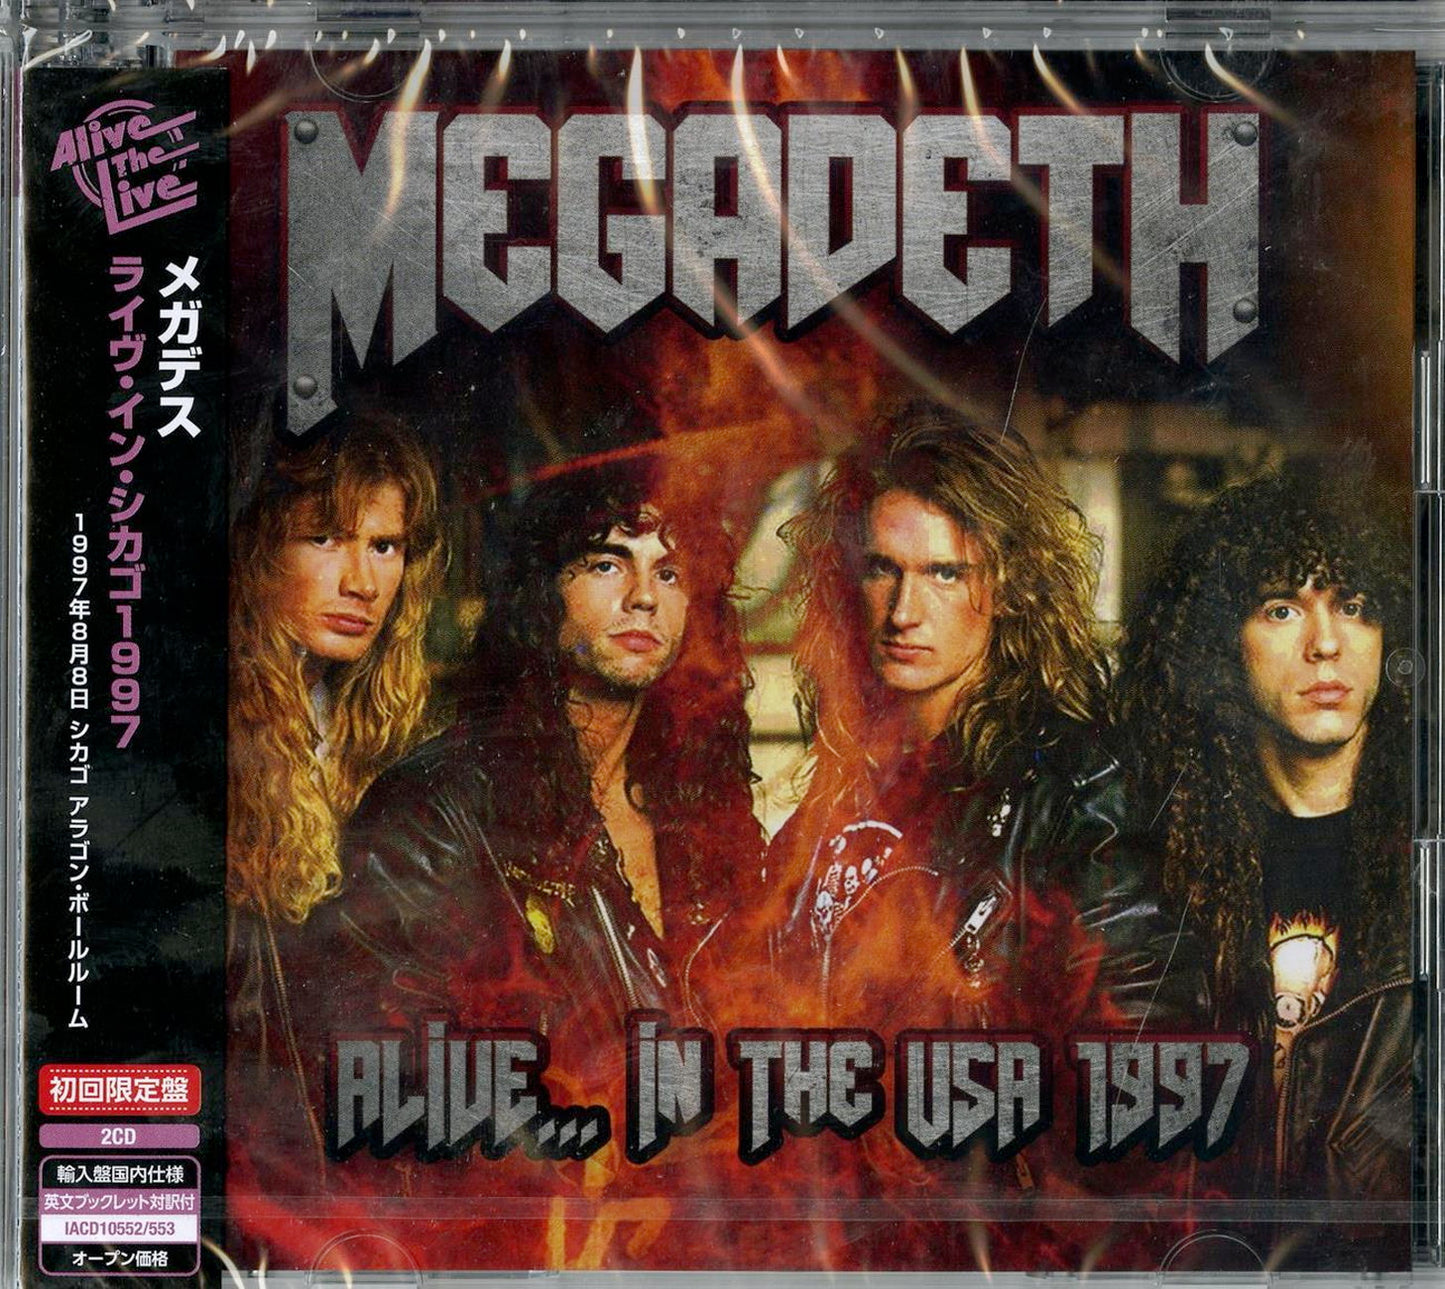 Megadeth - Alive...In The Usa - Import 2 CD